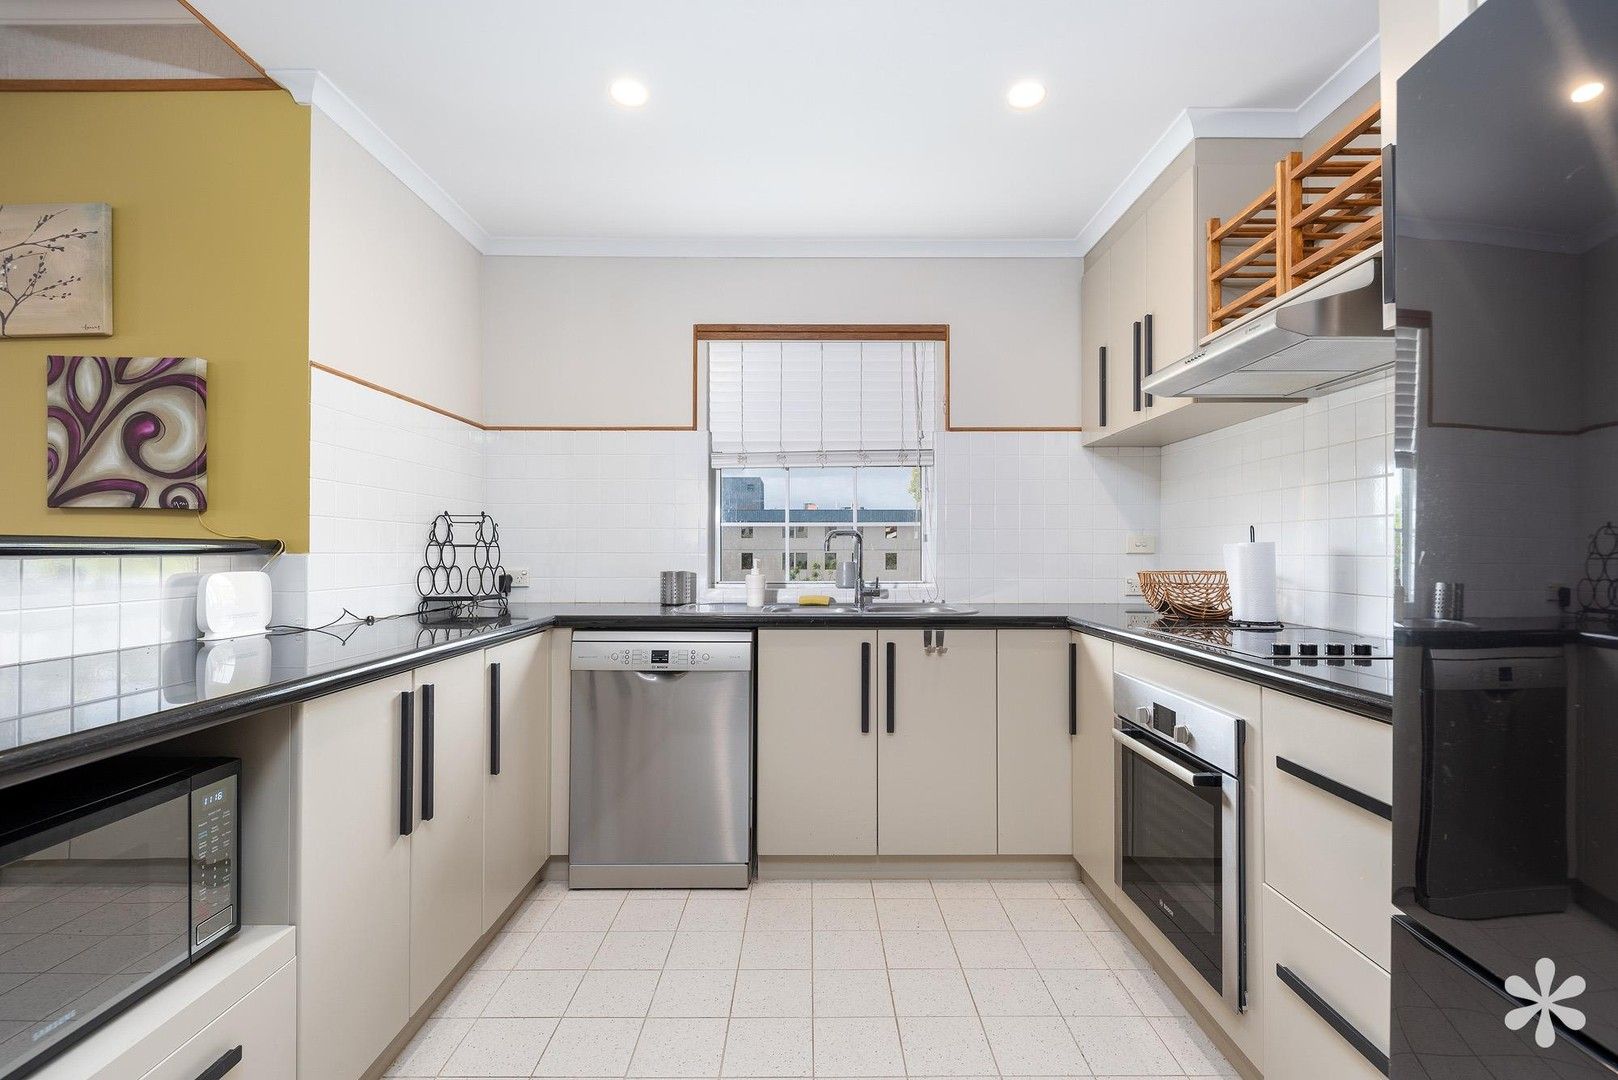 2 bedrooms Apartment / Unit / Flat in 27/105 Colin Street WEST PERTH WA, 6005